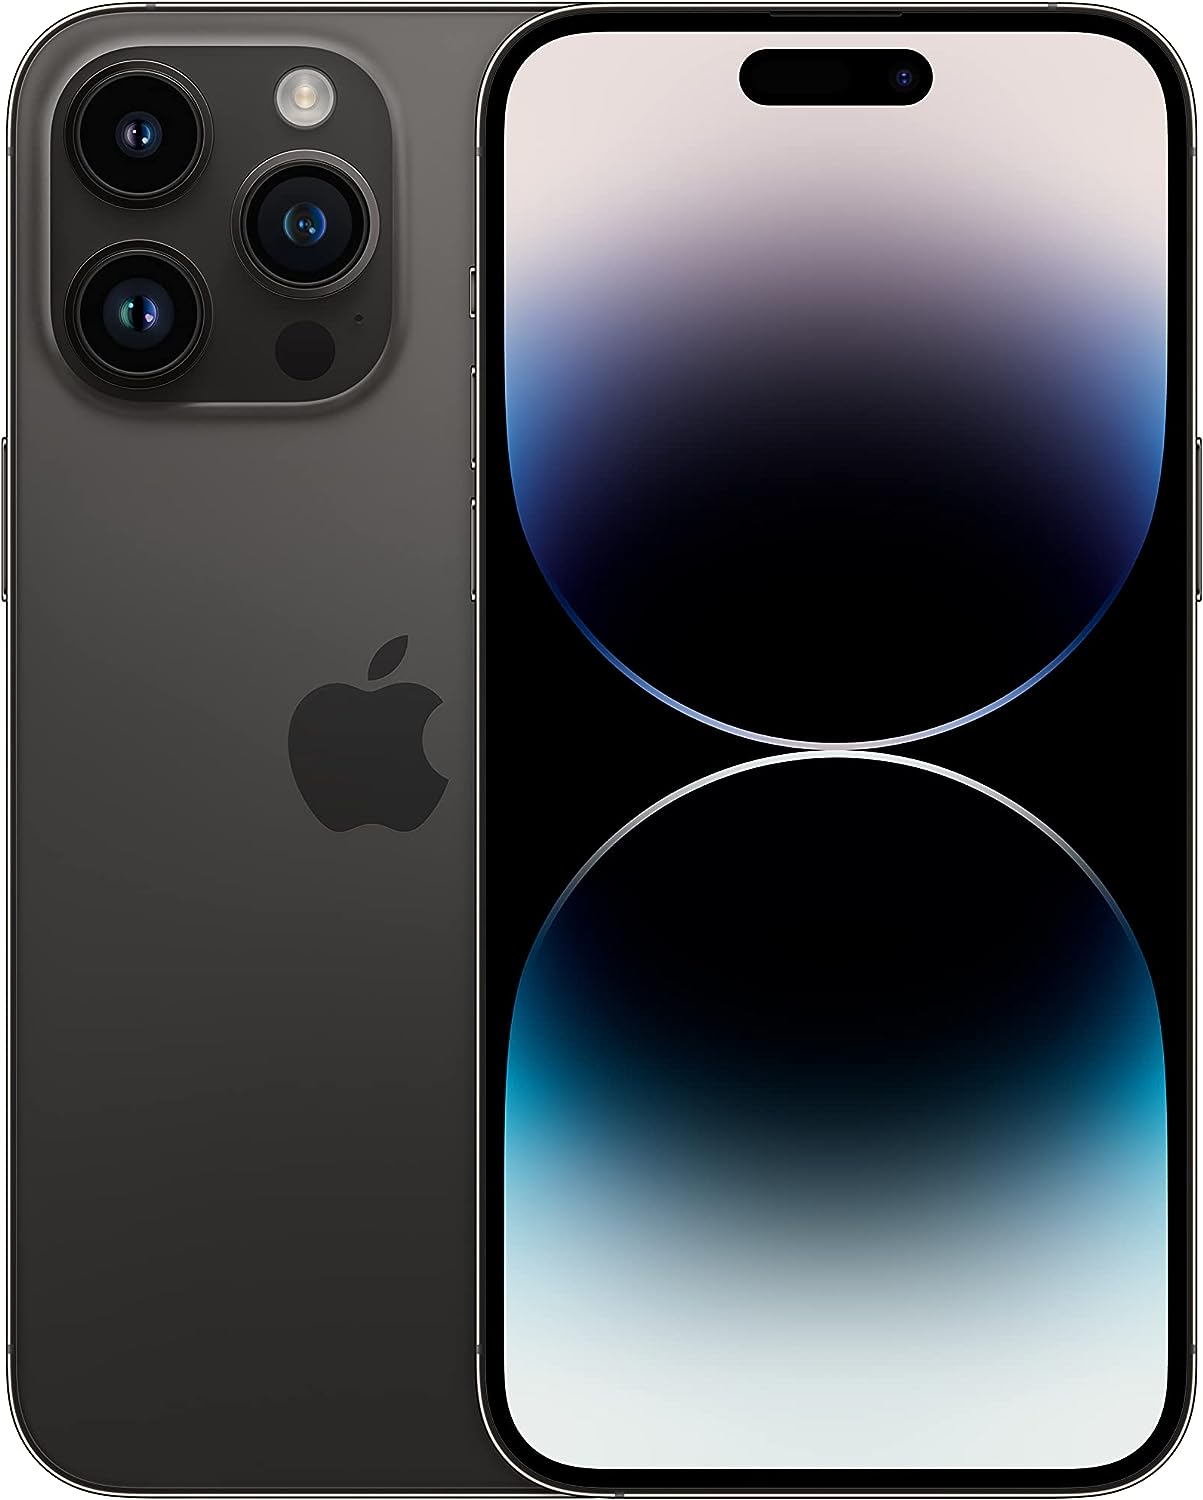 The image shows an iPhone 14 Pro Max, specifically a model that resembles an iPhone based on the distinctive design elements such as the notch at the top of the screen, the arrangement of the multiple camera lenses, flash, and microphone at the back, and the Apple logo. The phone has a black color scheme. The image provides a front and back view of the device.